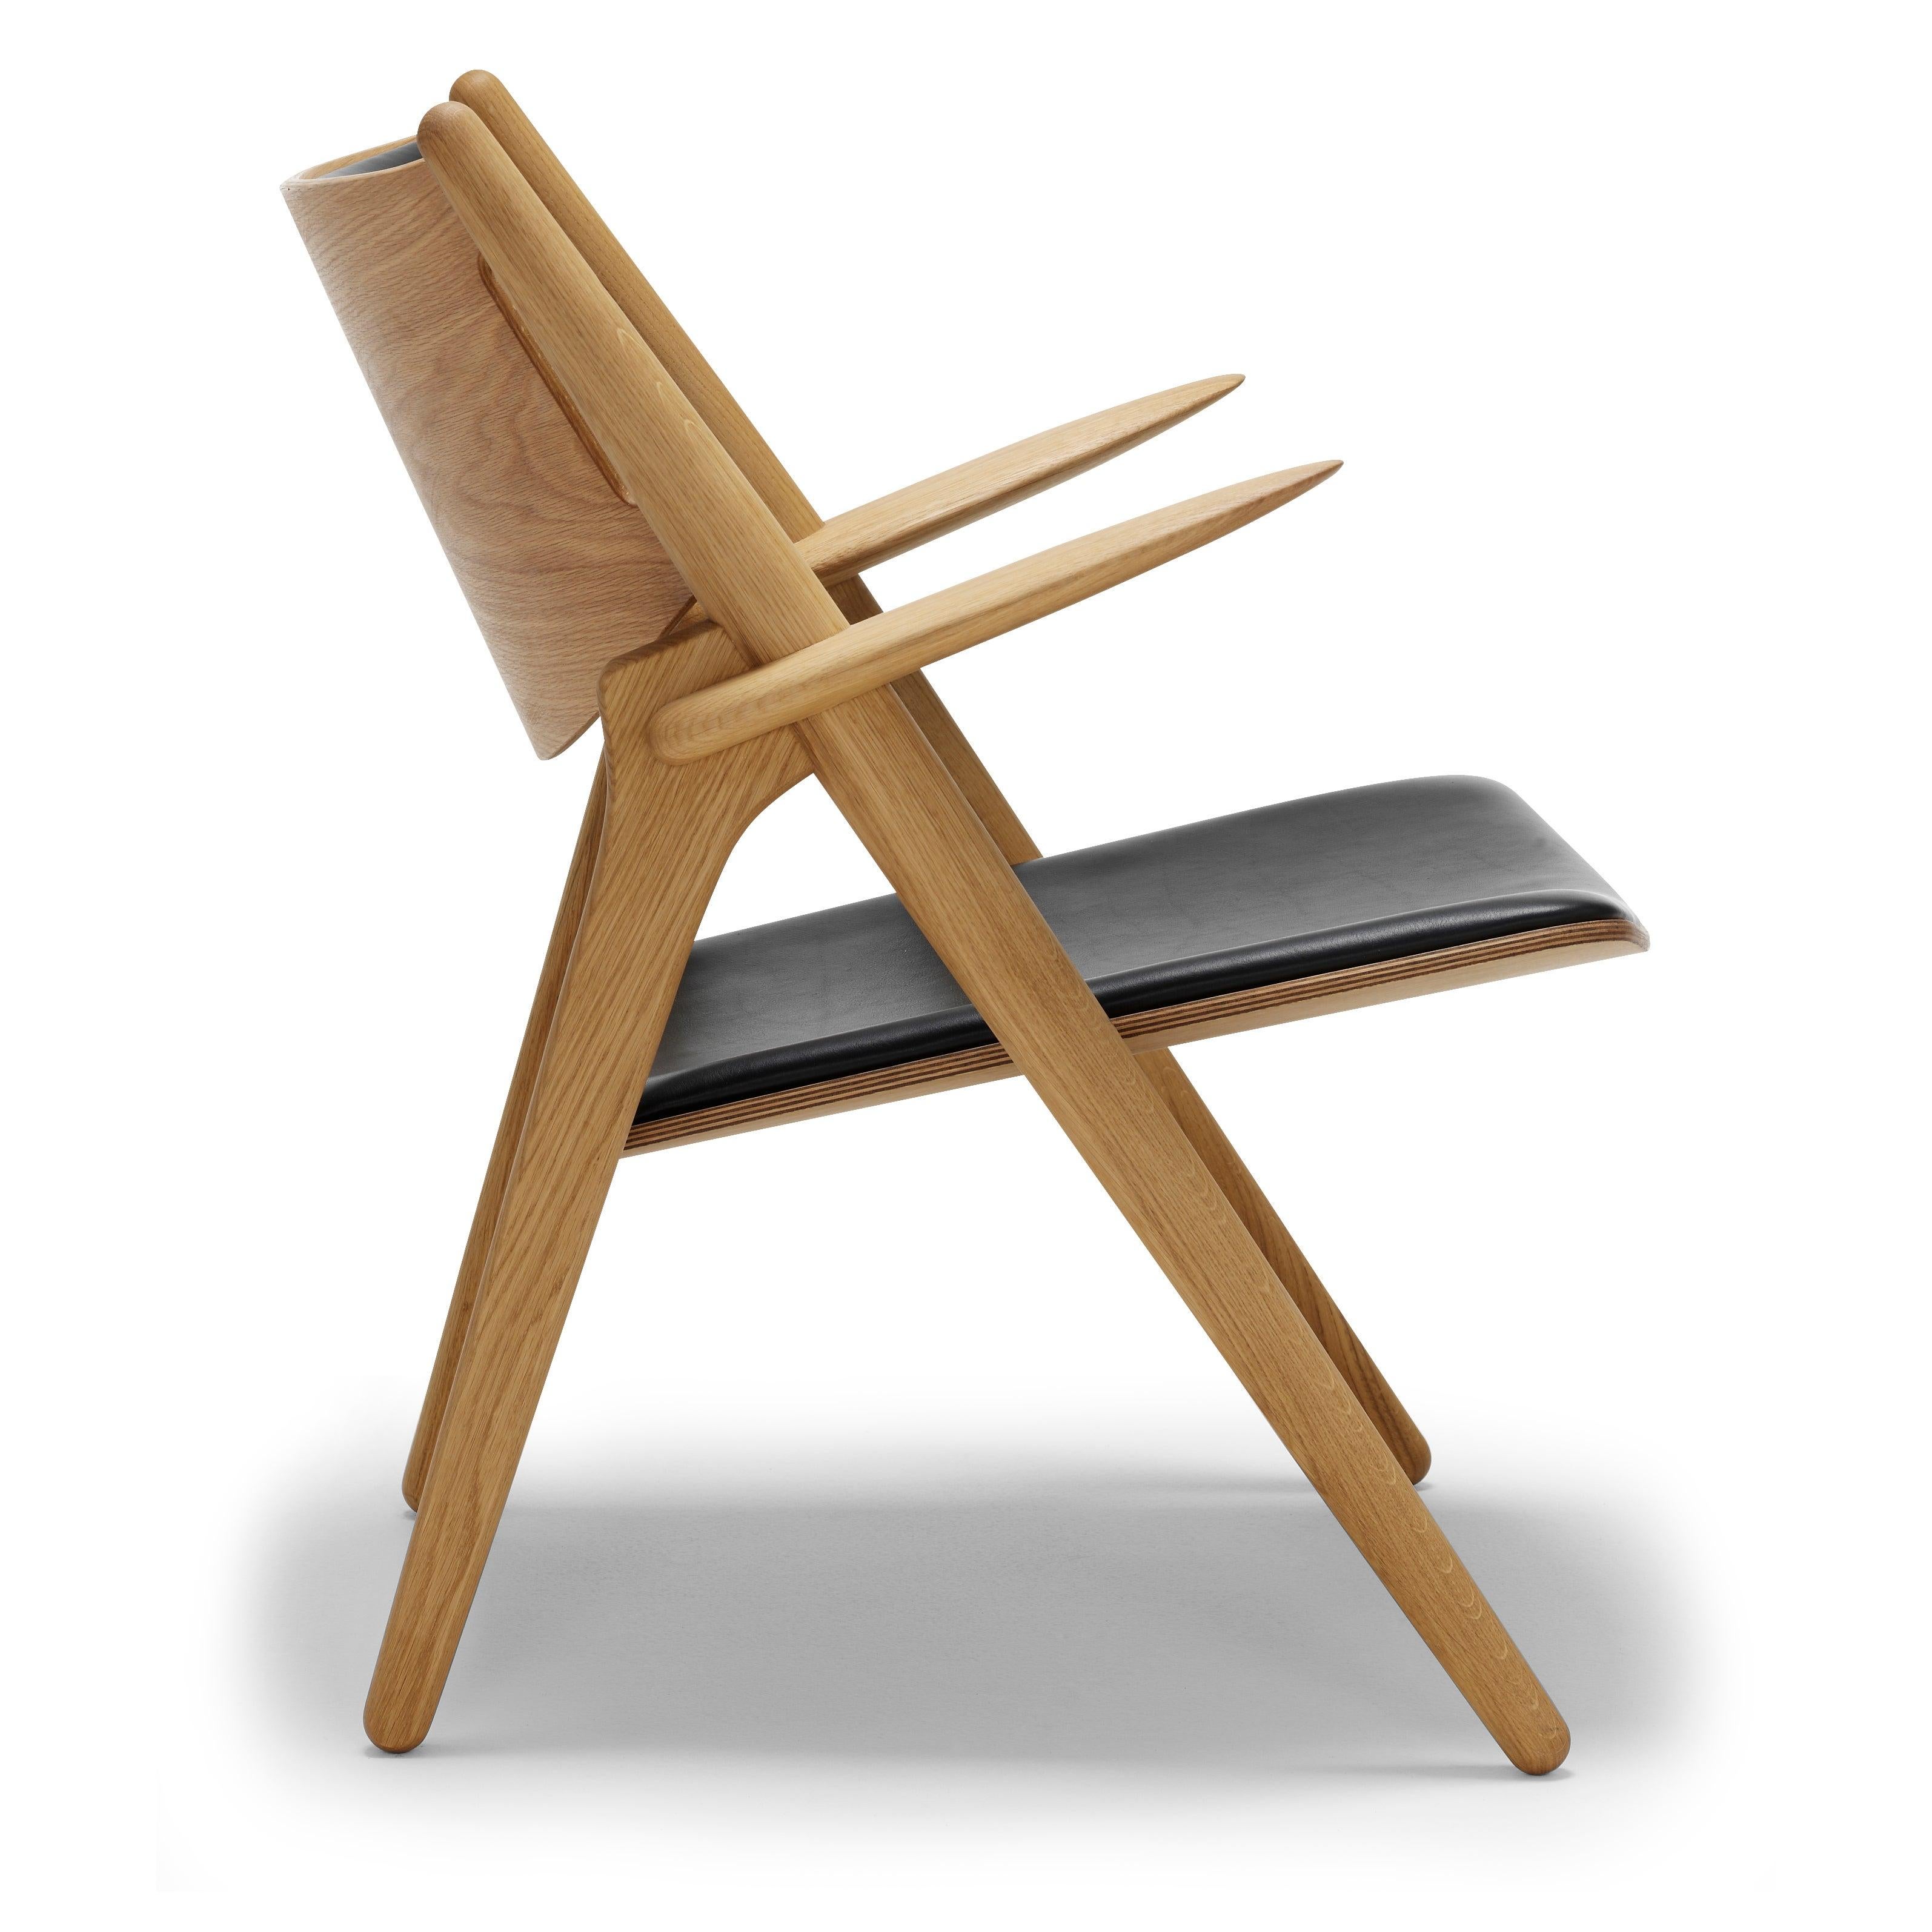 Ch28P lounge chair with oiled oak frame and Thor 301 leather by Hans J. Wegner. Â  

Additional info:
Material: Wood, foam, upholstery
Frame finish: Oak oil
Seat finish: Thor 301 - Leather group B
Dimensions: 26.3in D x 28.7in W x 30.3in H